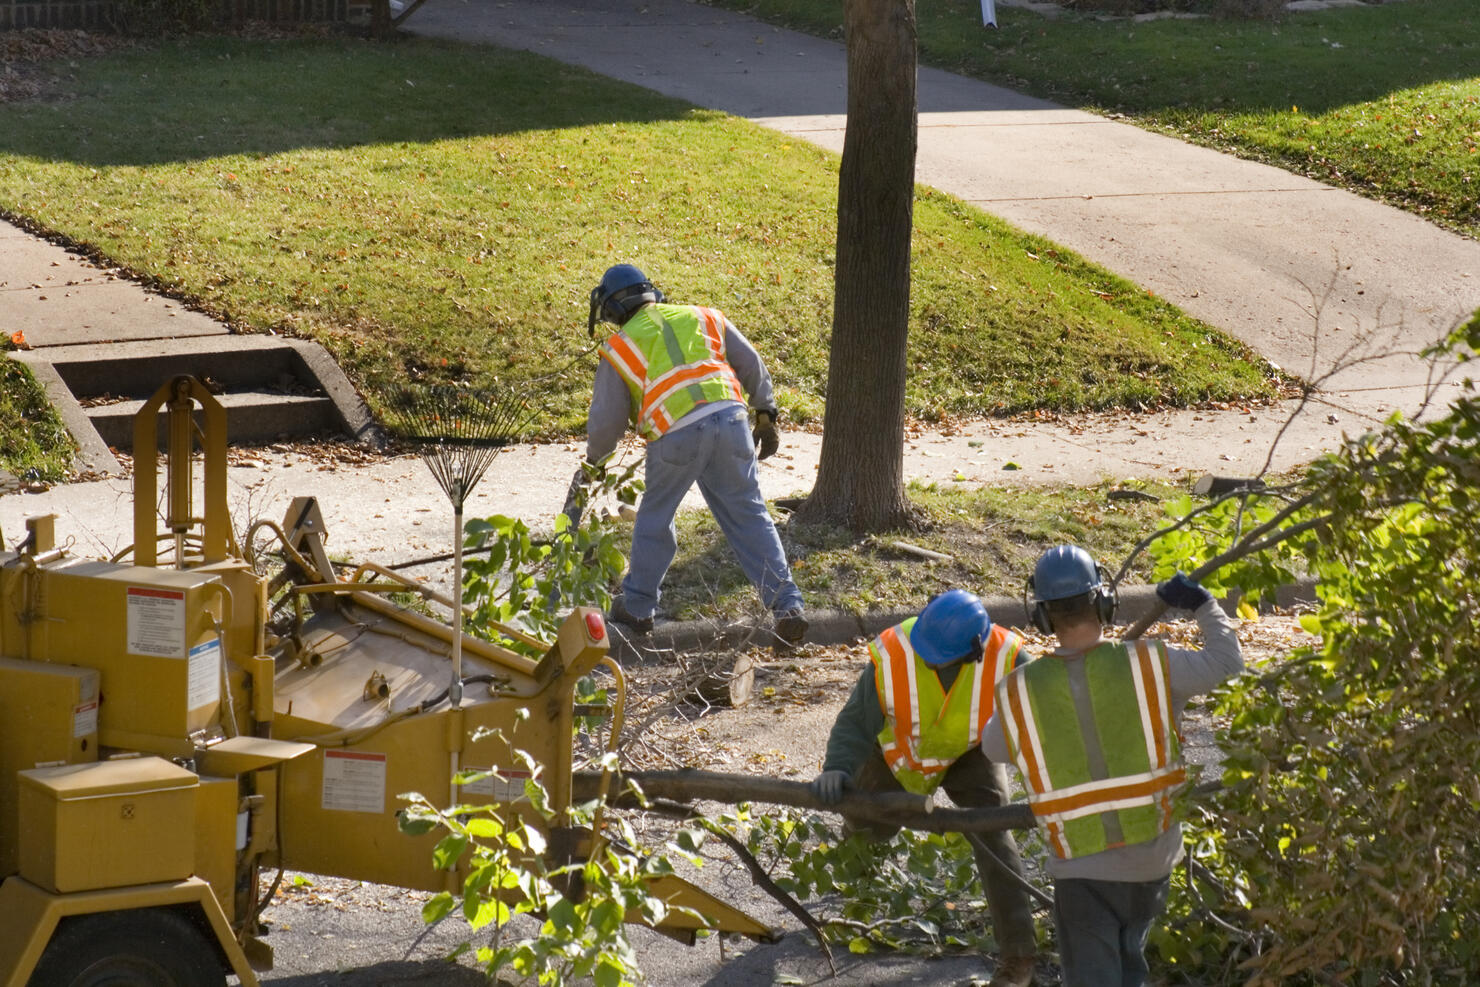 Tree Pruning Service with Wood Chipper and Workers on Street